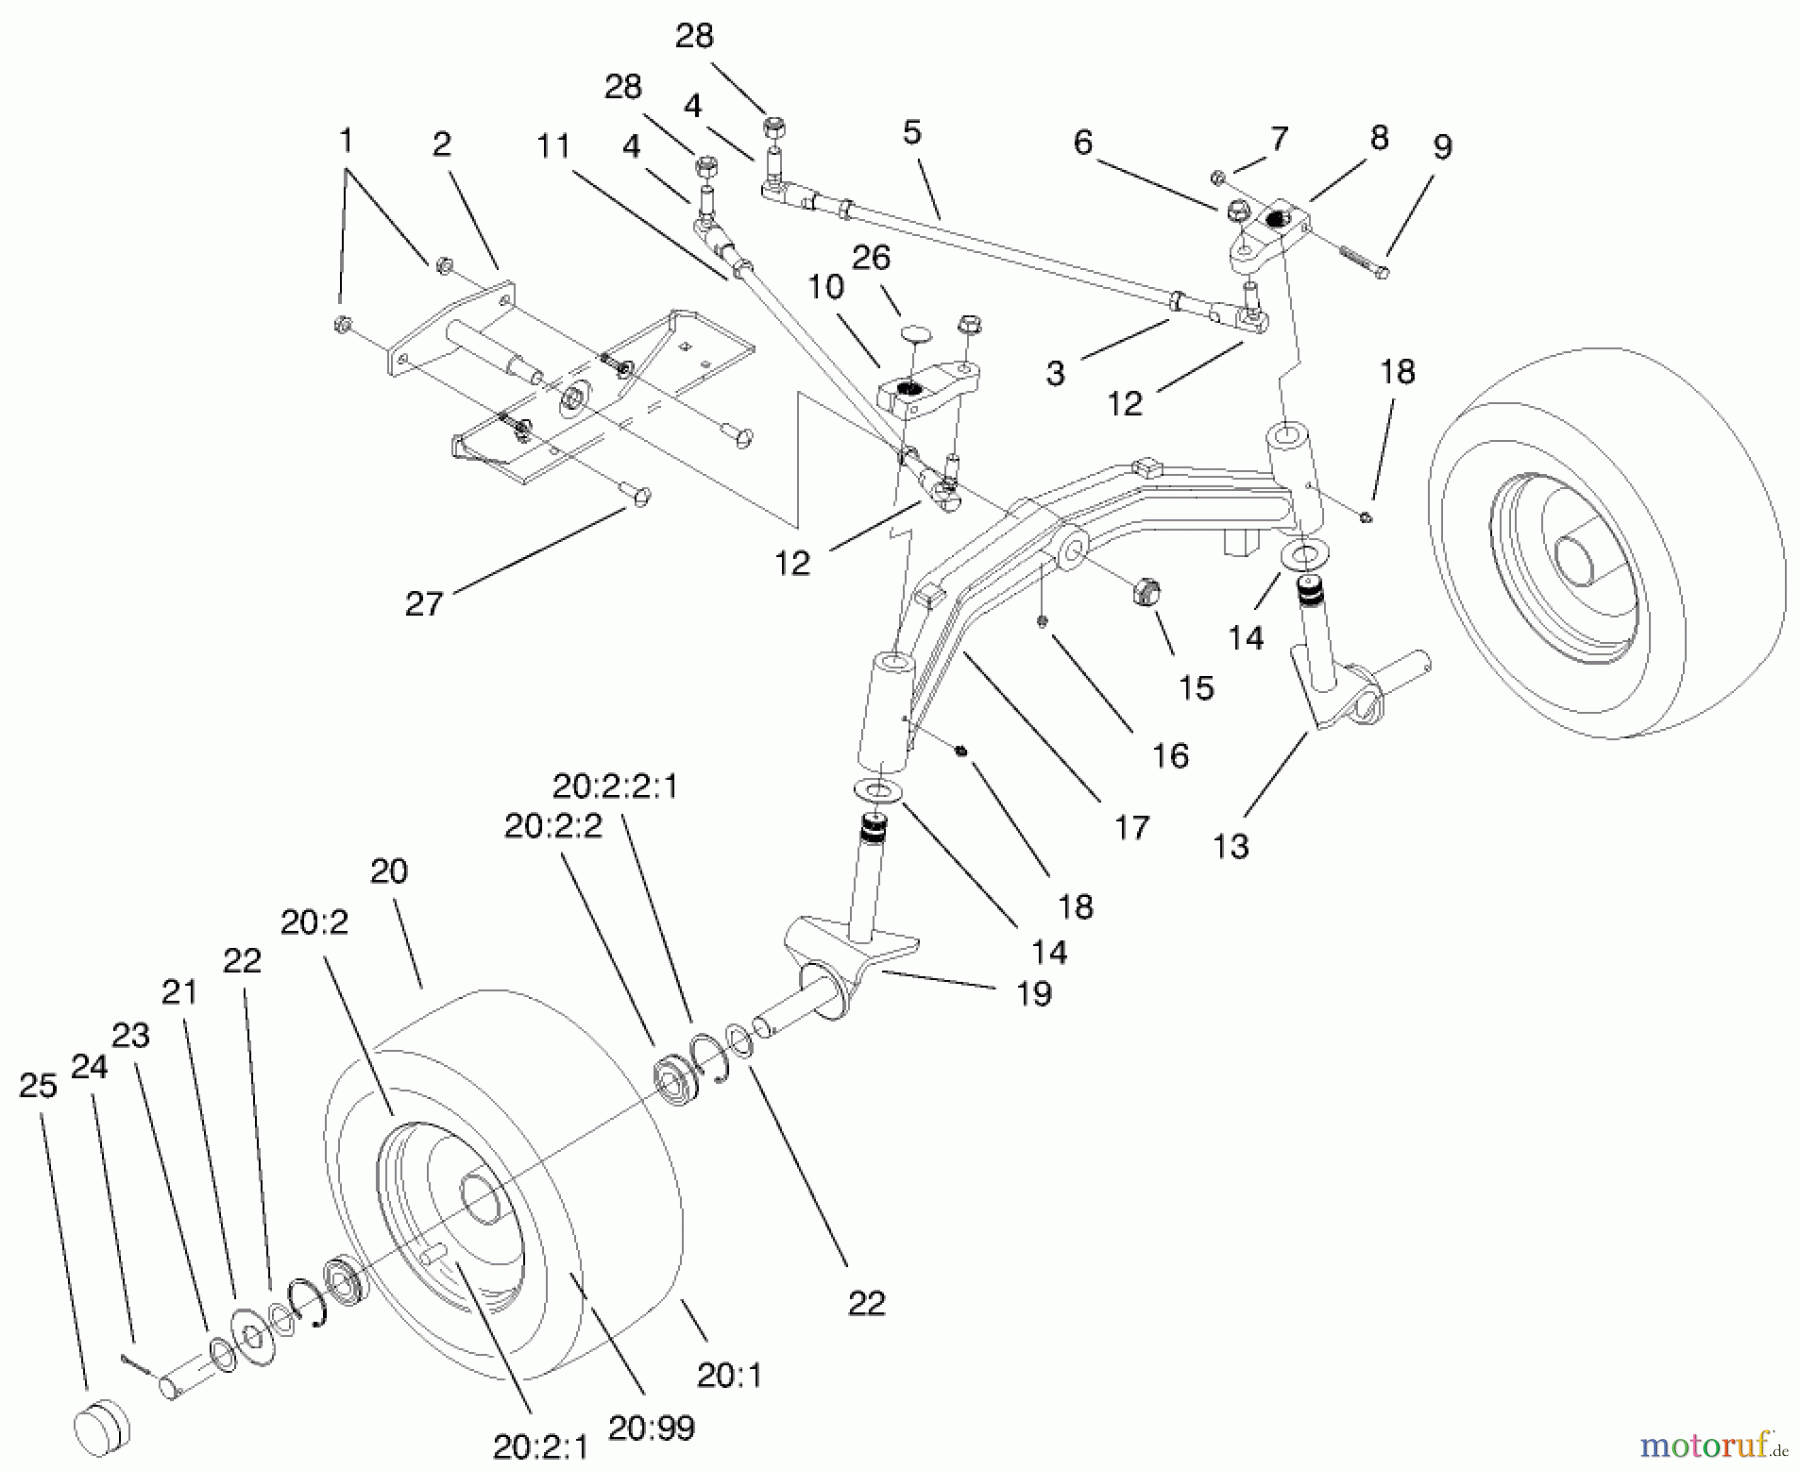  Toro Neu Mowers, Lawn & Garden Tractor Seite 1 73561 (522xi) - Toro 522xi Garden Tractor, 2000 (200000001-200000200) TIE RODS, SPINDLE, & FRONT AXLE ASSEMBLY